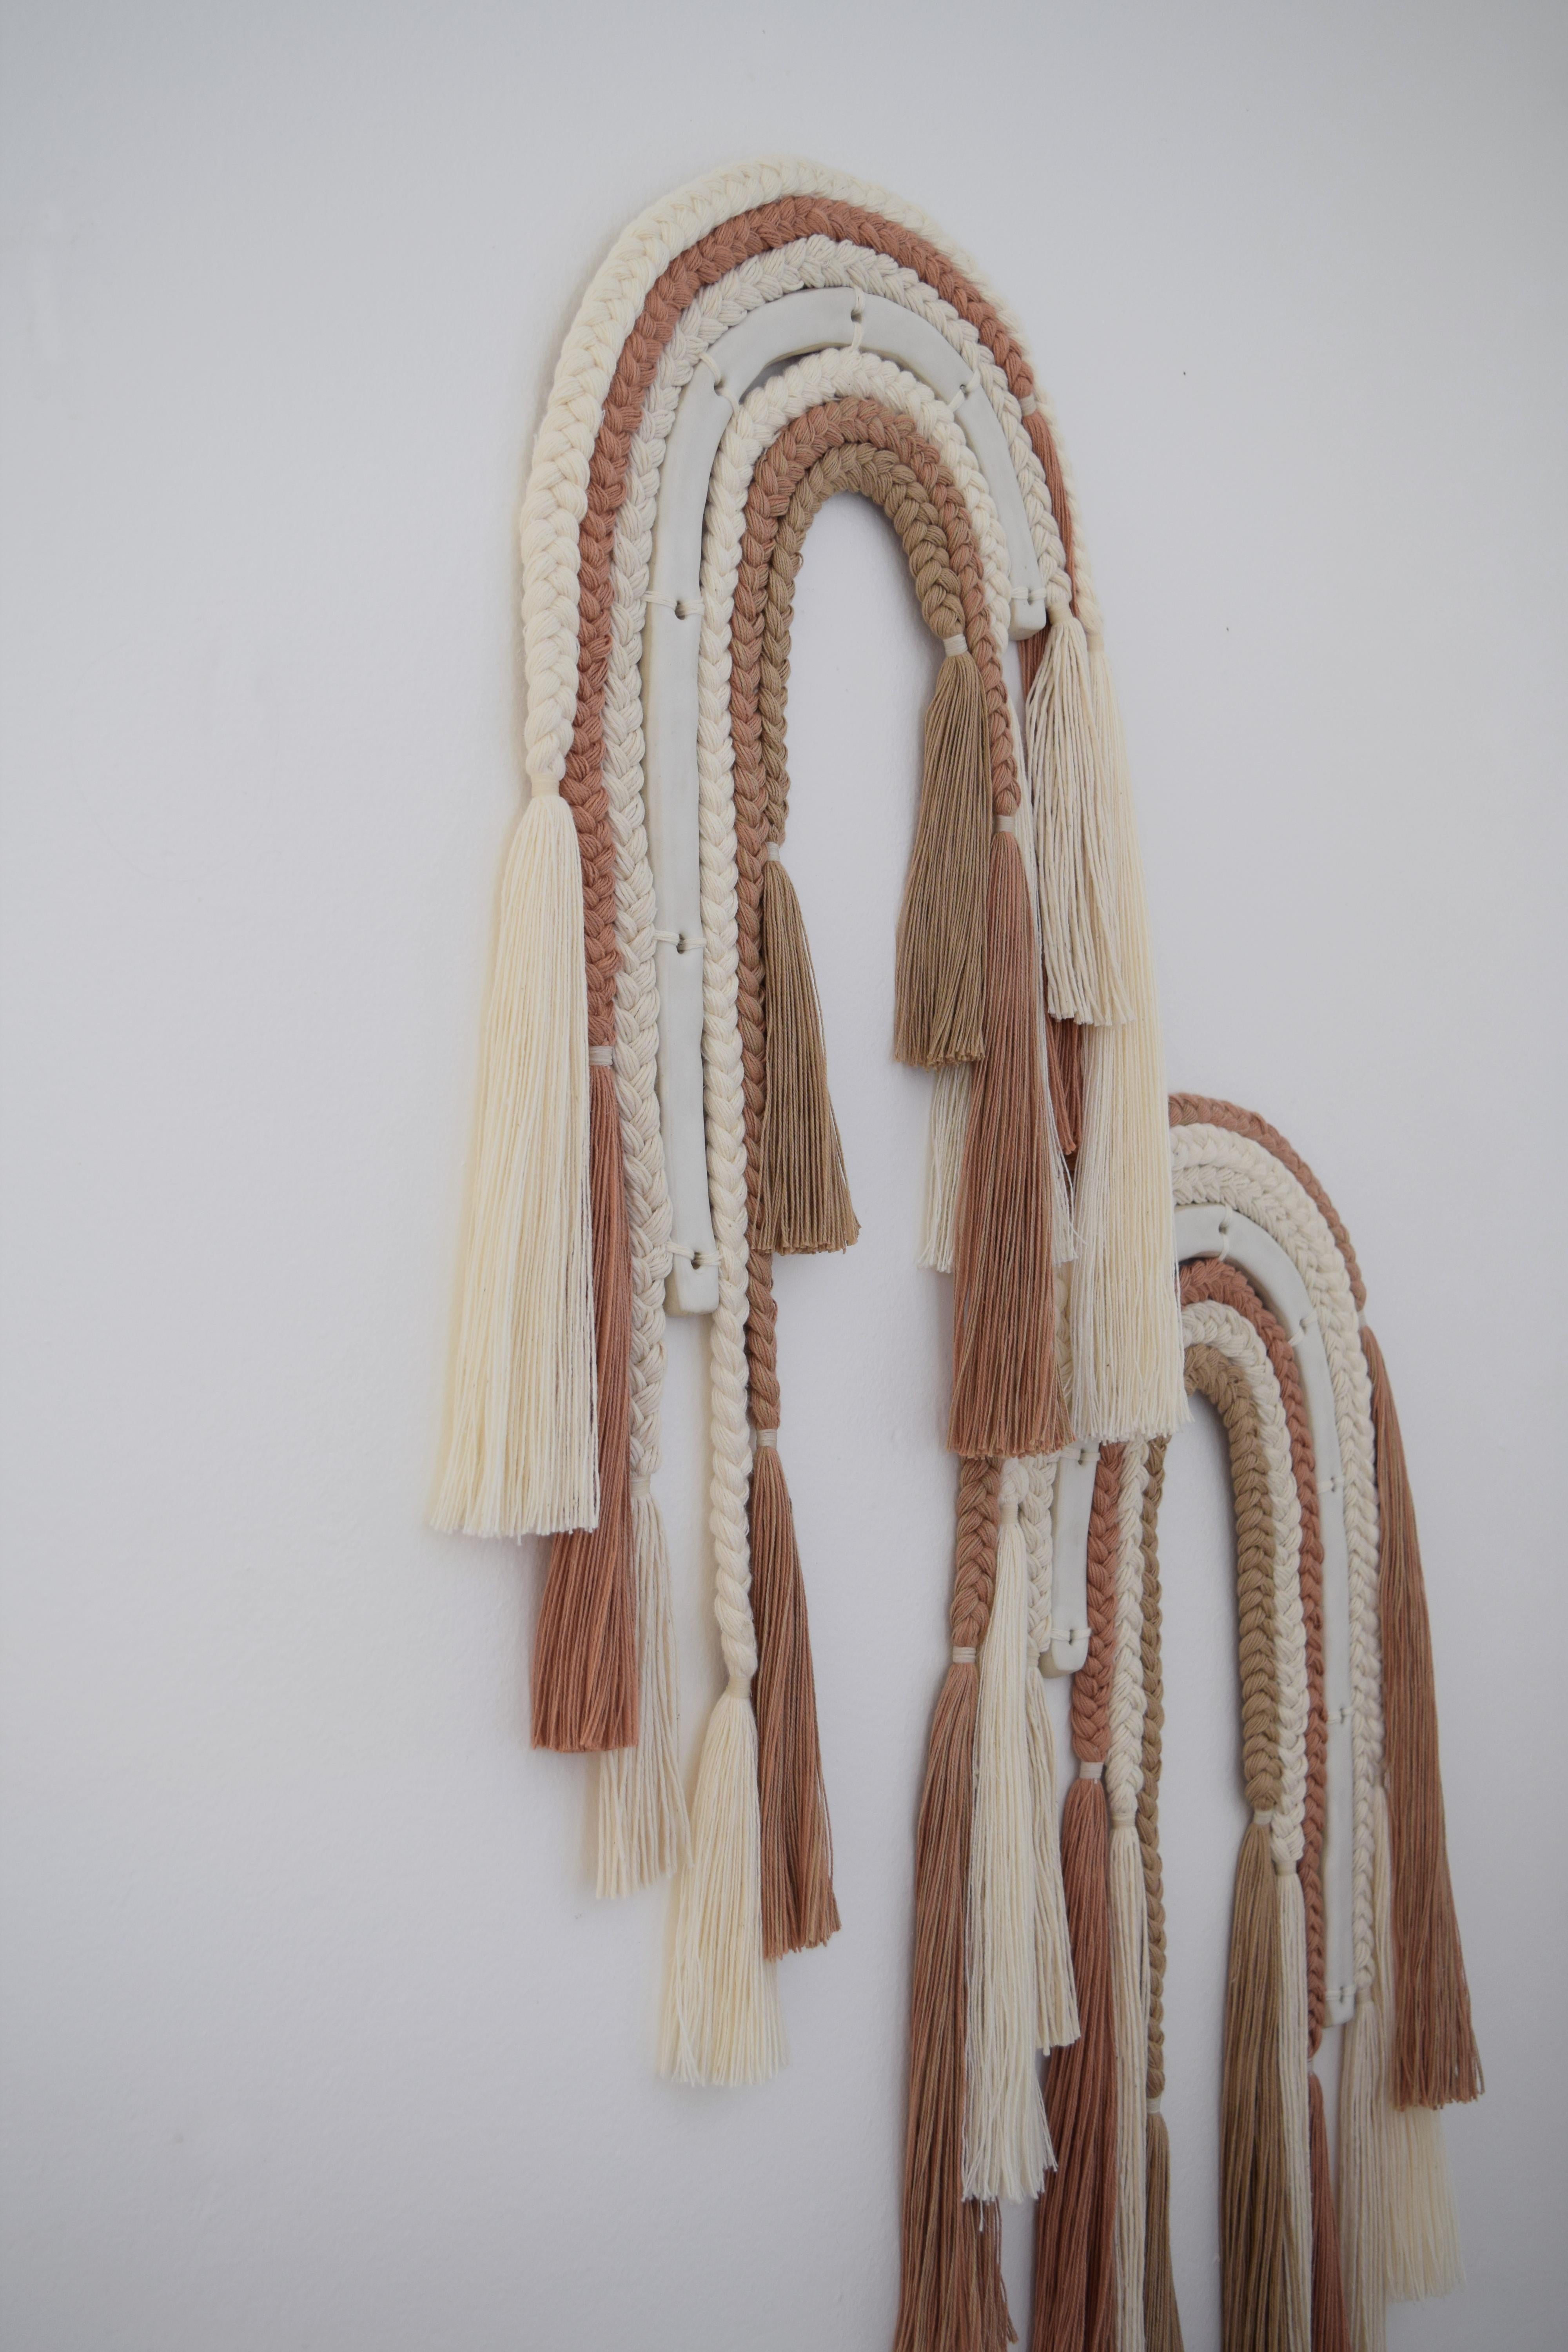 One of a kind wall sculpture #654 by Karen Gayle Tinney

One of a kind two-panel wall sculpture. Hand formed ceramic arches are finished with satin white glaze and surrounded by layers of braids in varying weights of cotton. The cotton braids are